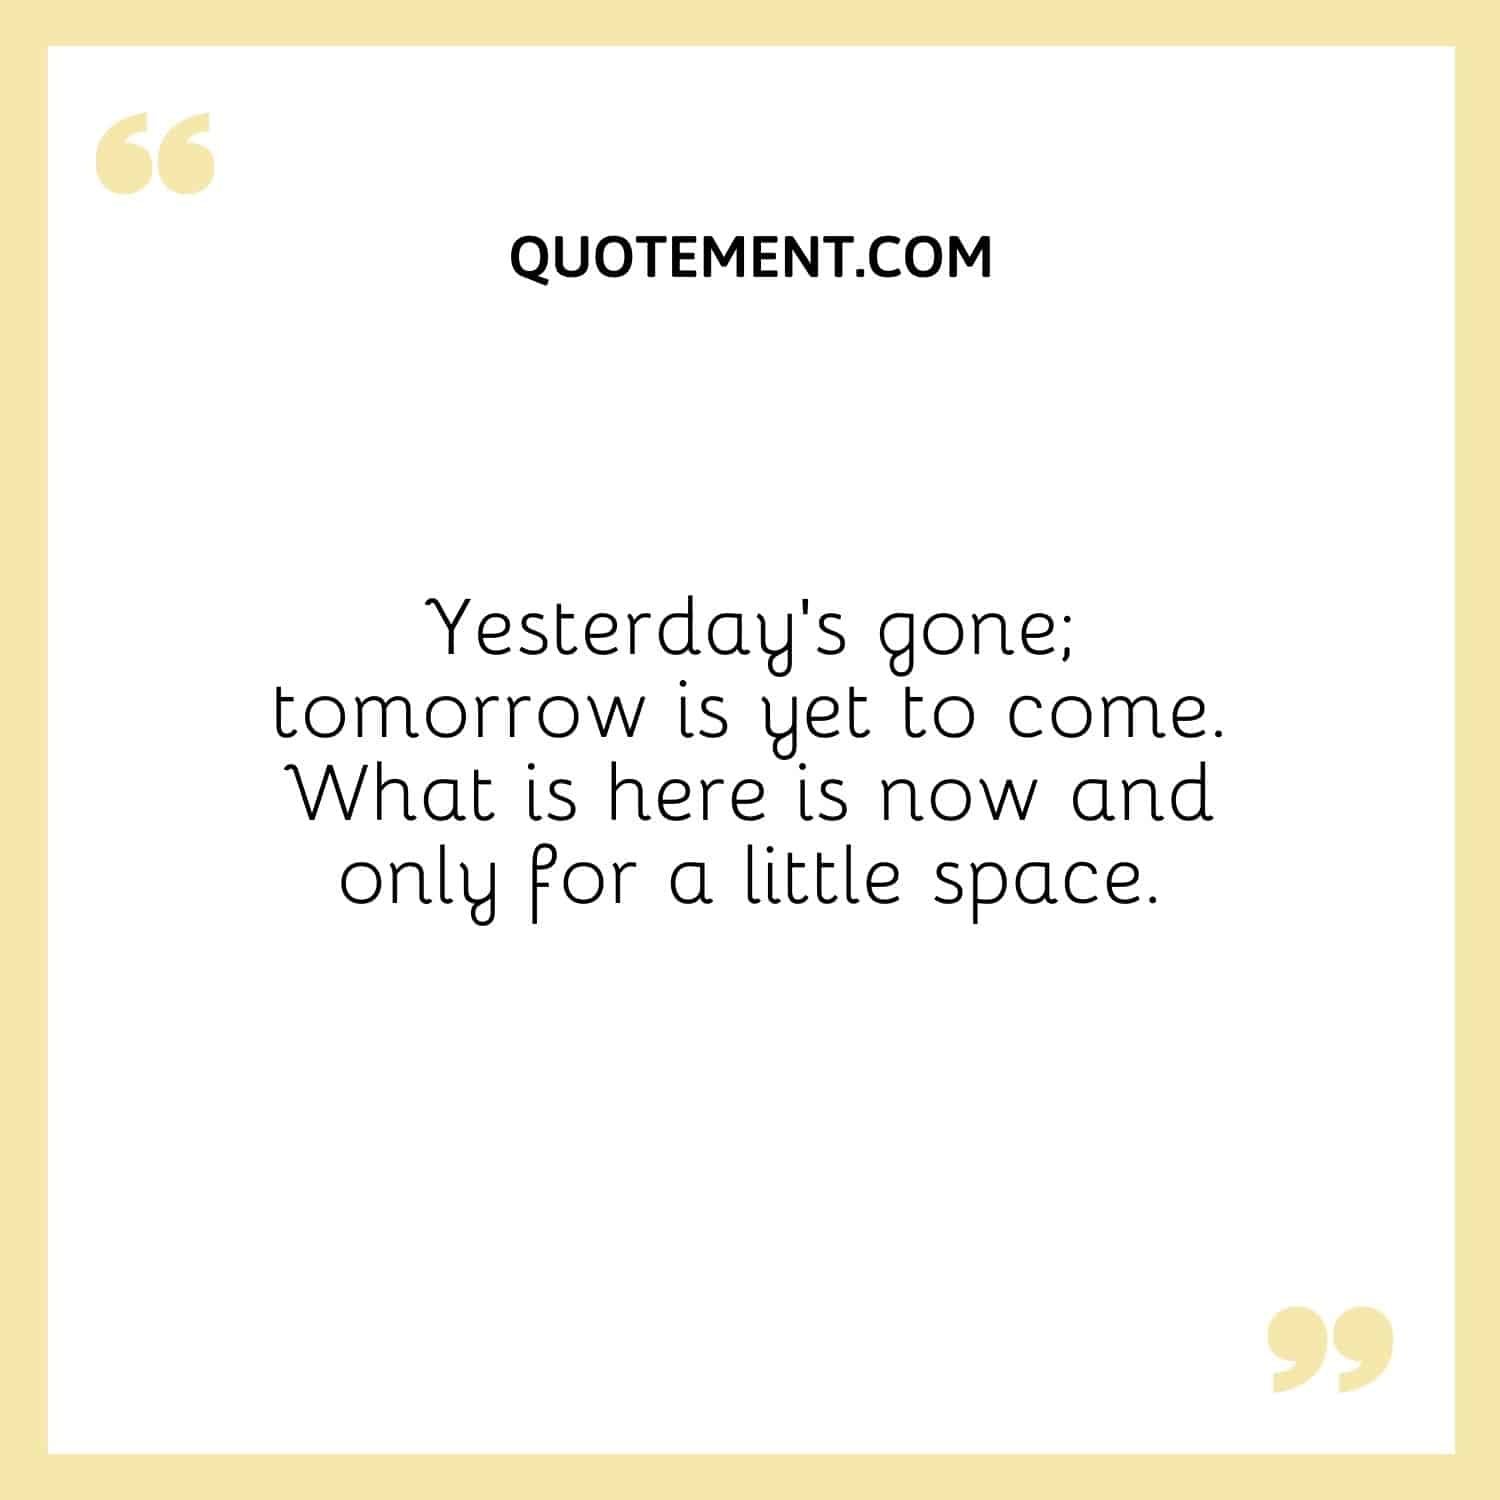 Yesterday’s gone; tomorrow is yet to come.